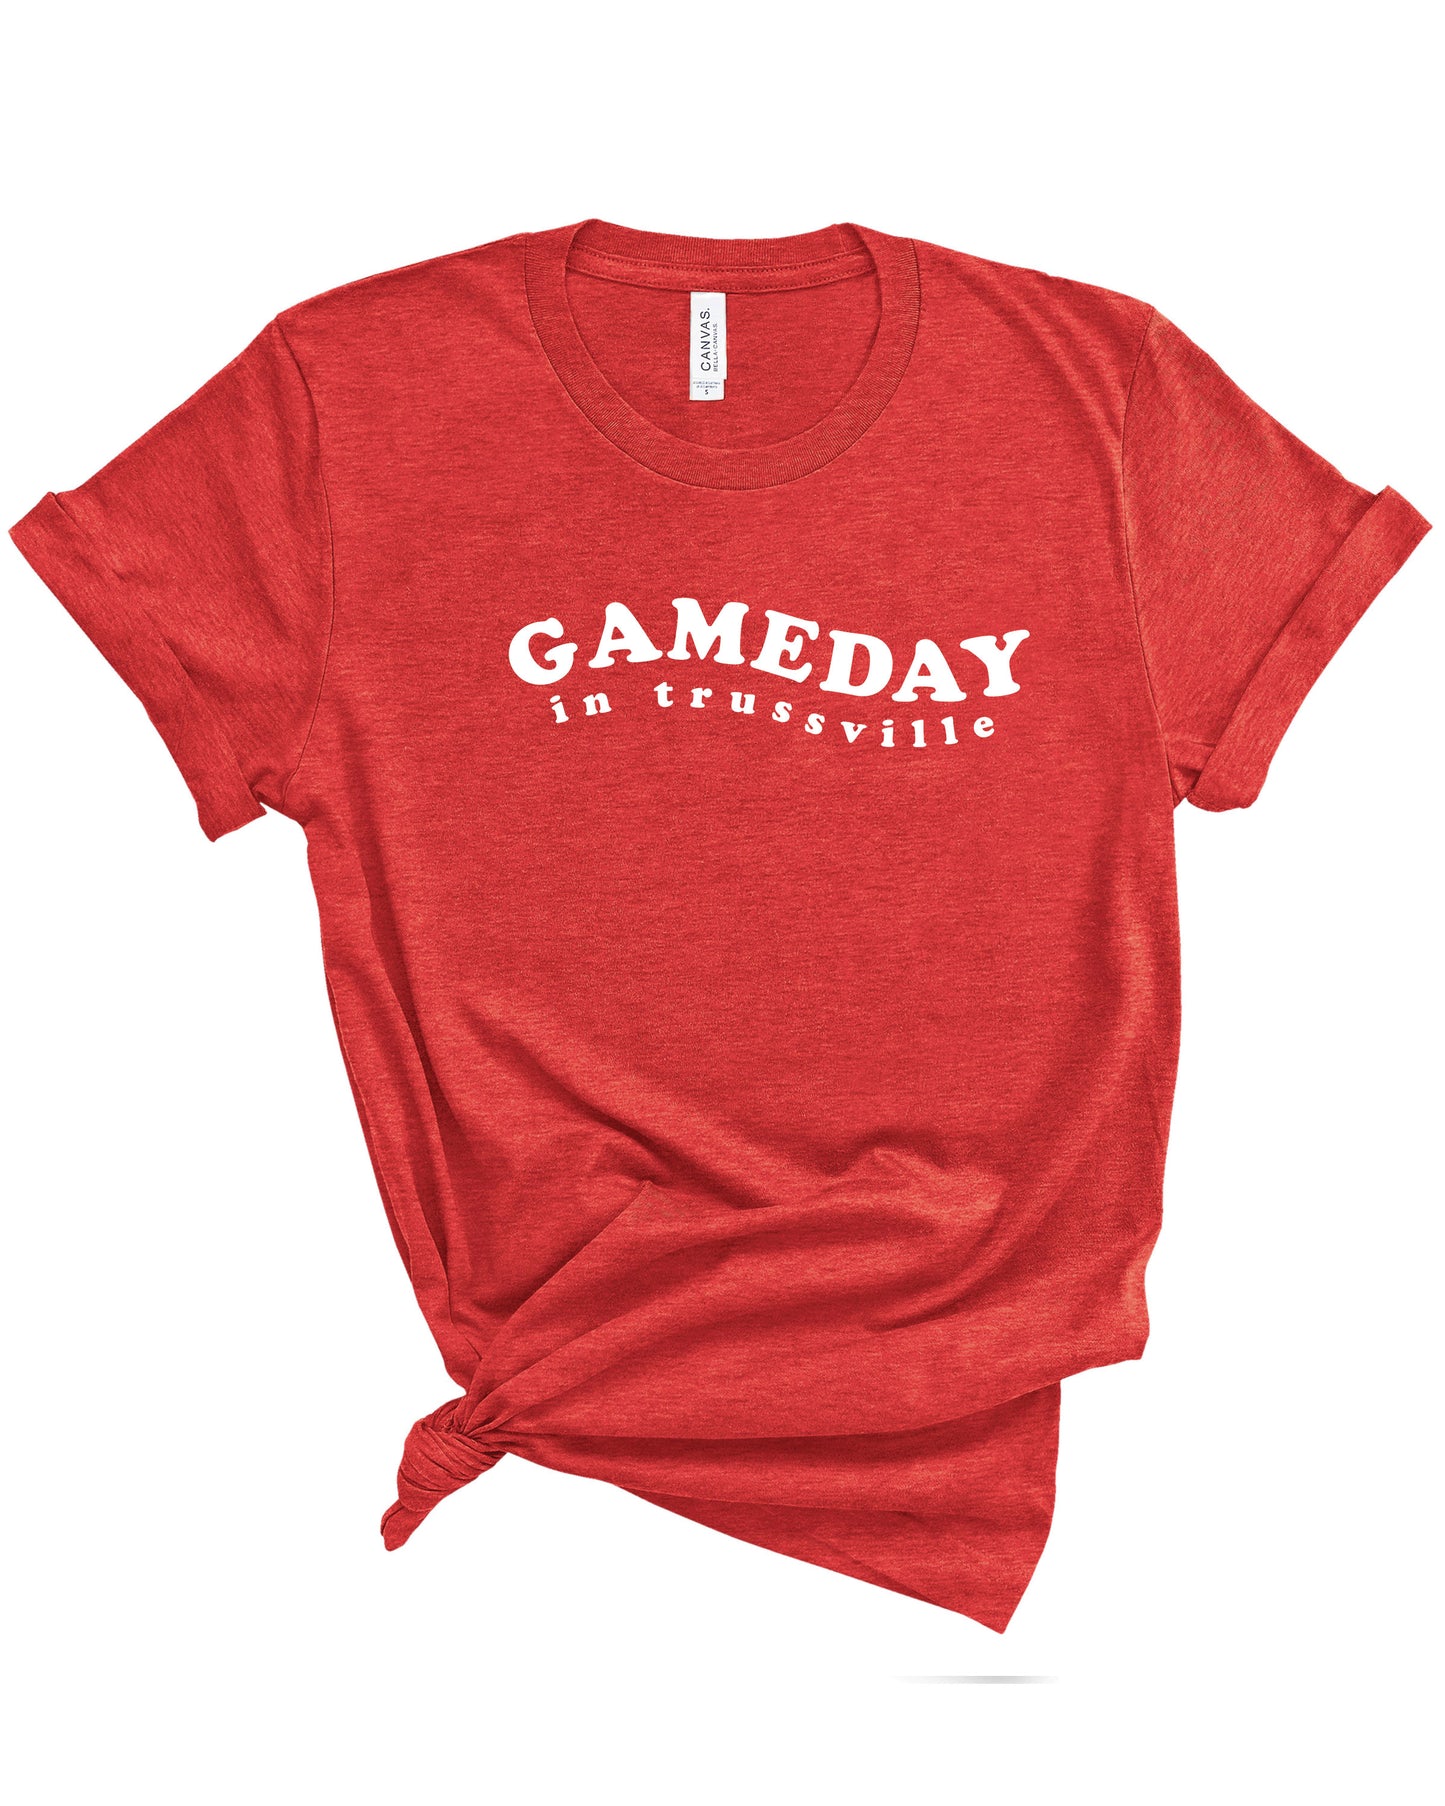 Gameday in Trussville | Adult Tee-Adult Tee-Sister Shirts-Sister Shirts, Cute & Custom Tees for Mama & Littles in Trussville, Alabama.